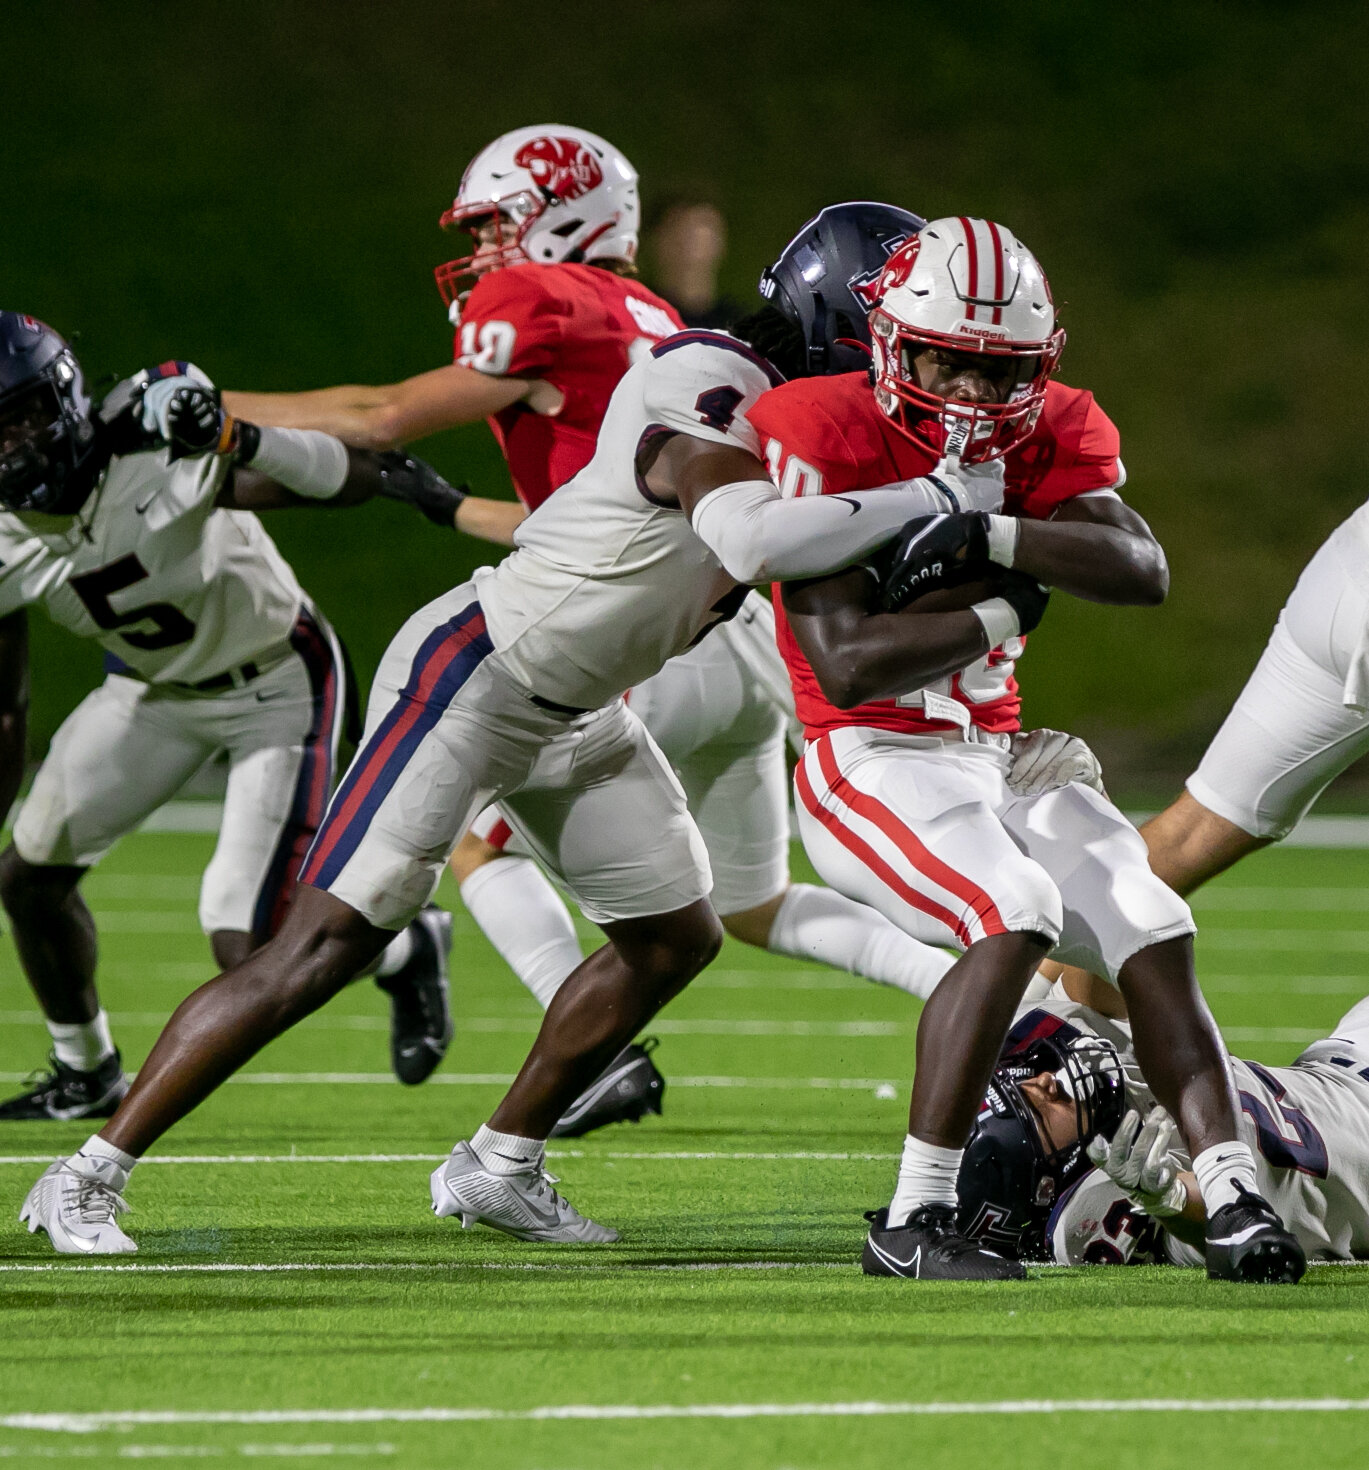 Tremayne Hill fights for yardage during Friday's game between Katy and Tompkins at Rhodes Stadium.